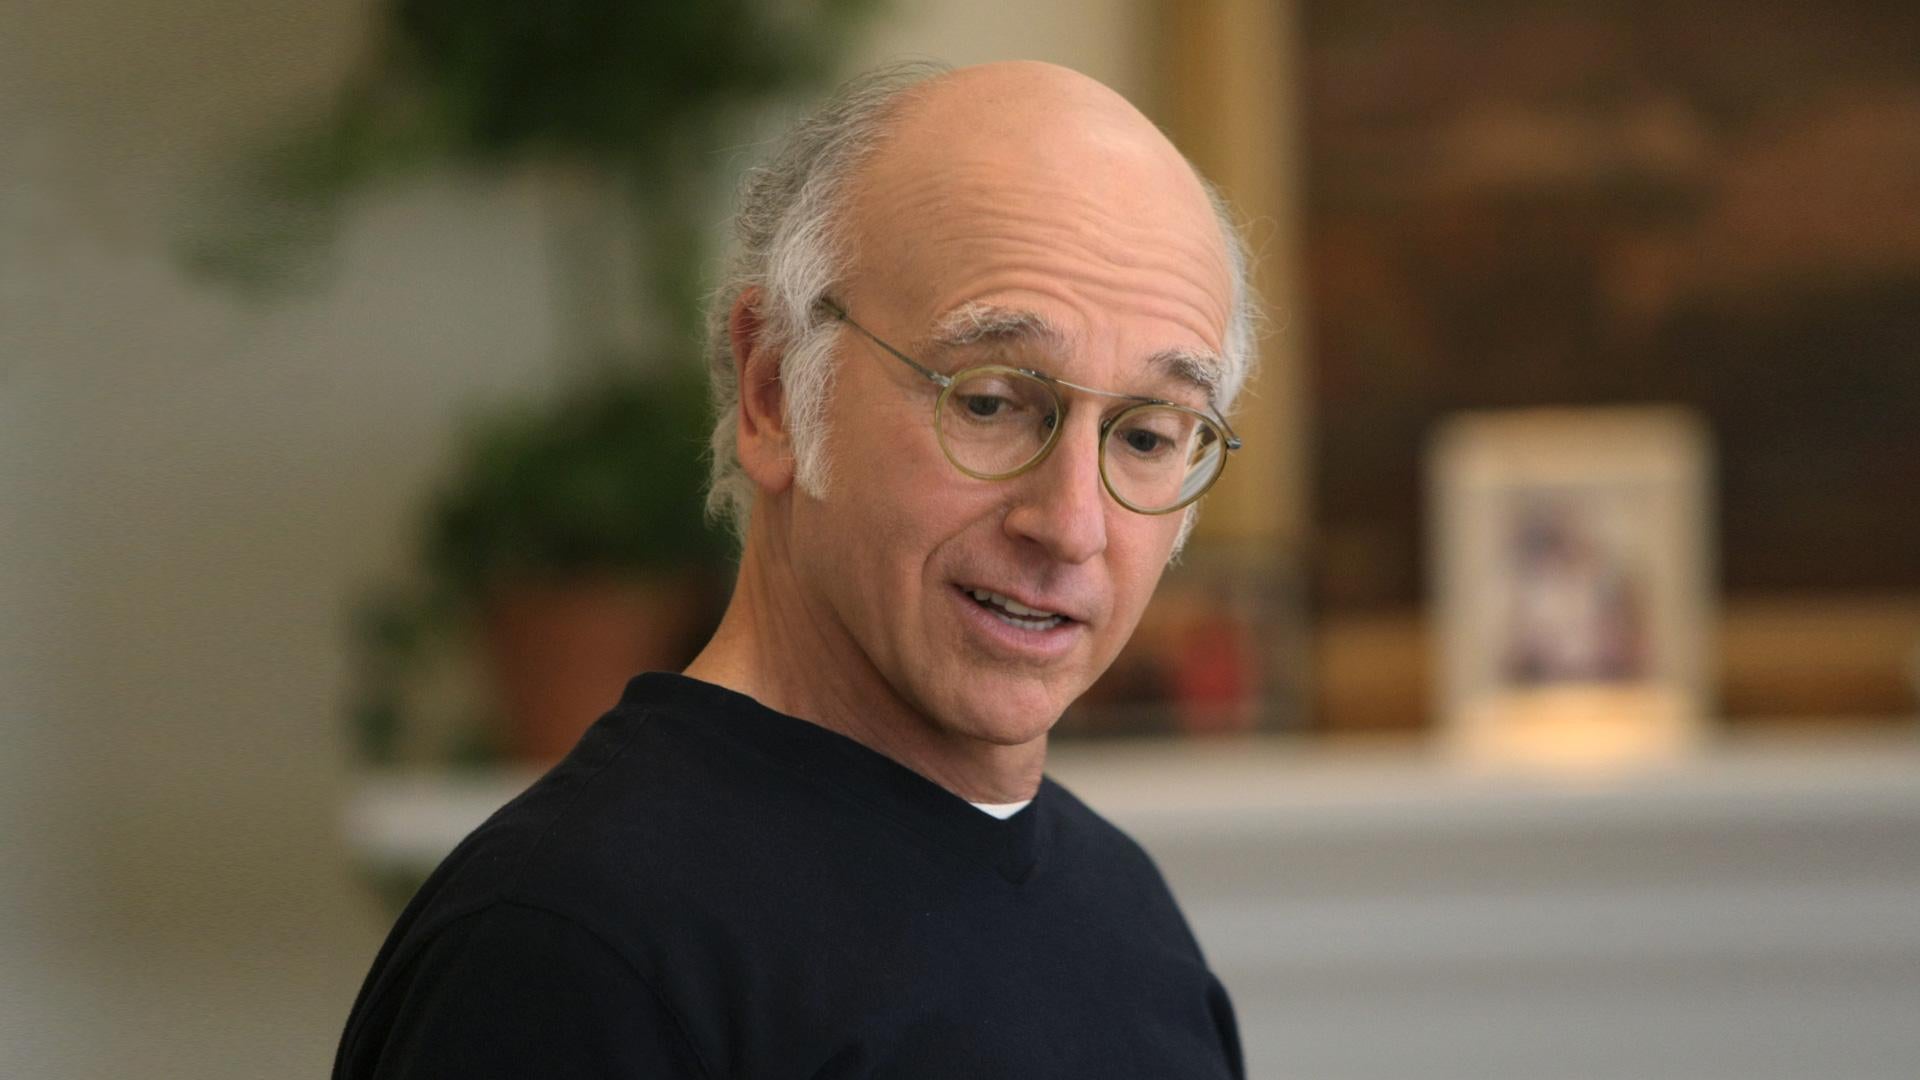 Curb Your Enthusiasm season 9: Larry David will be back in new episodes, HBO confirms ...1920 x 1080